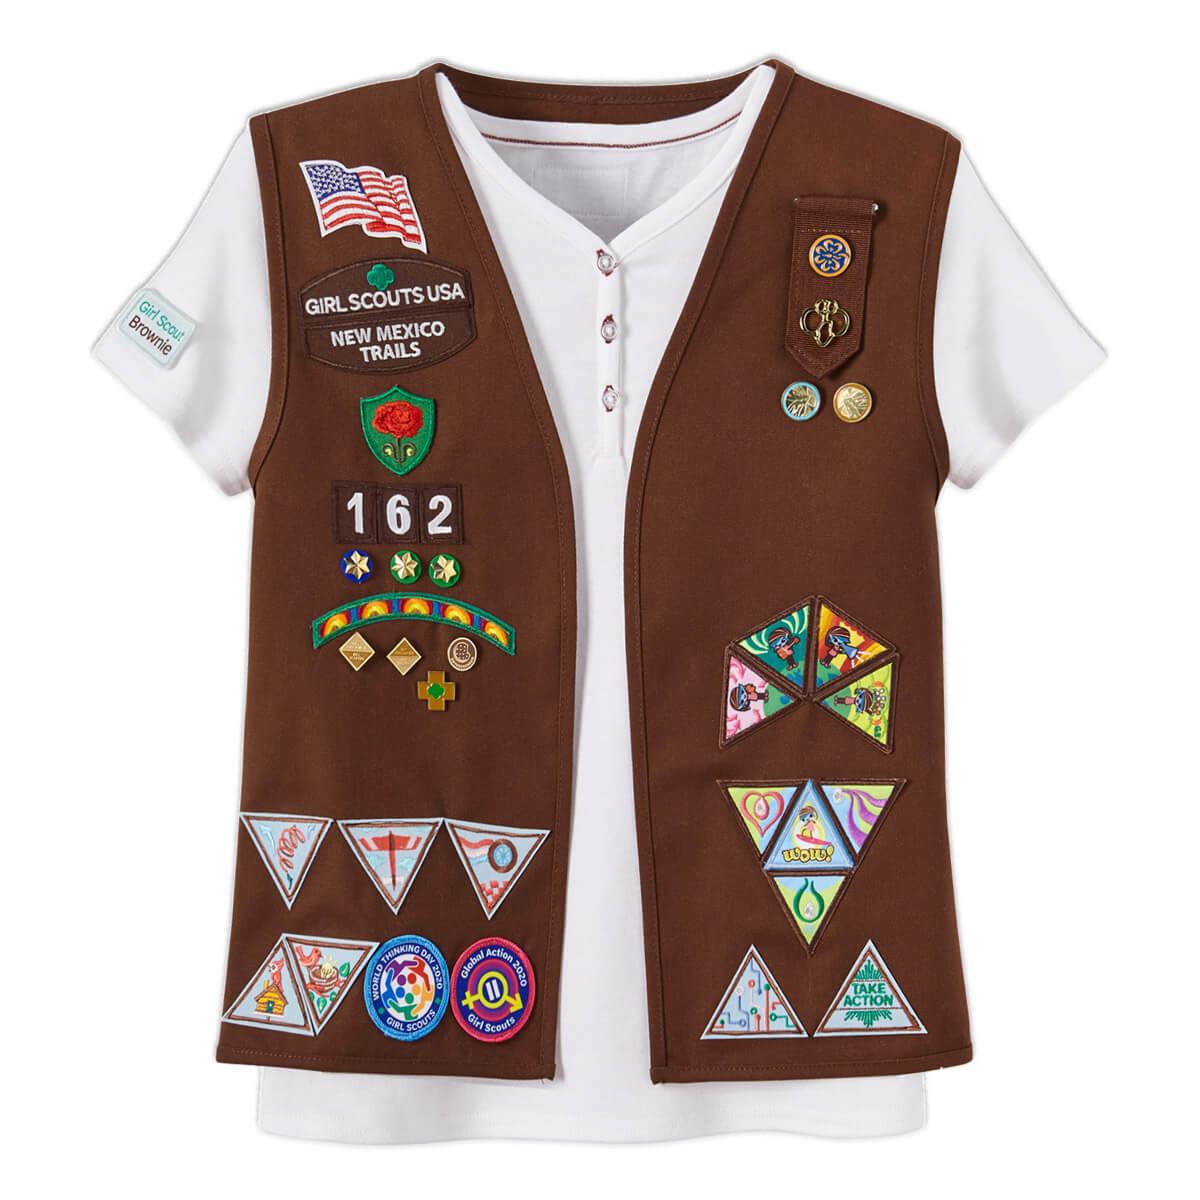 uniforms-insignia-list-and-placement-girl-scouts